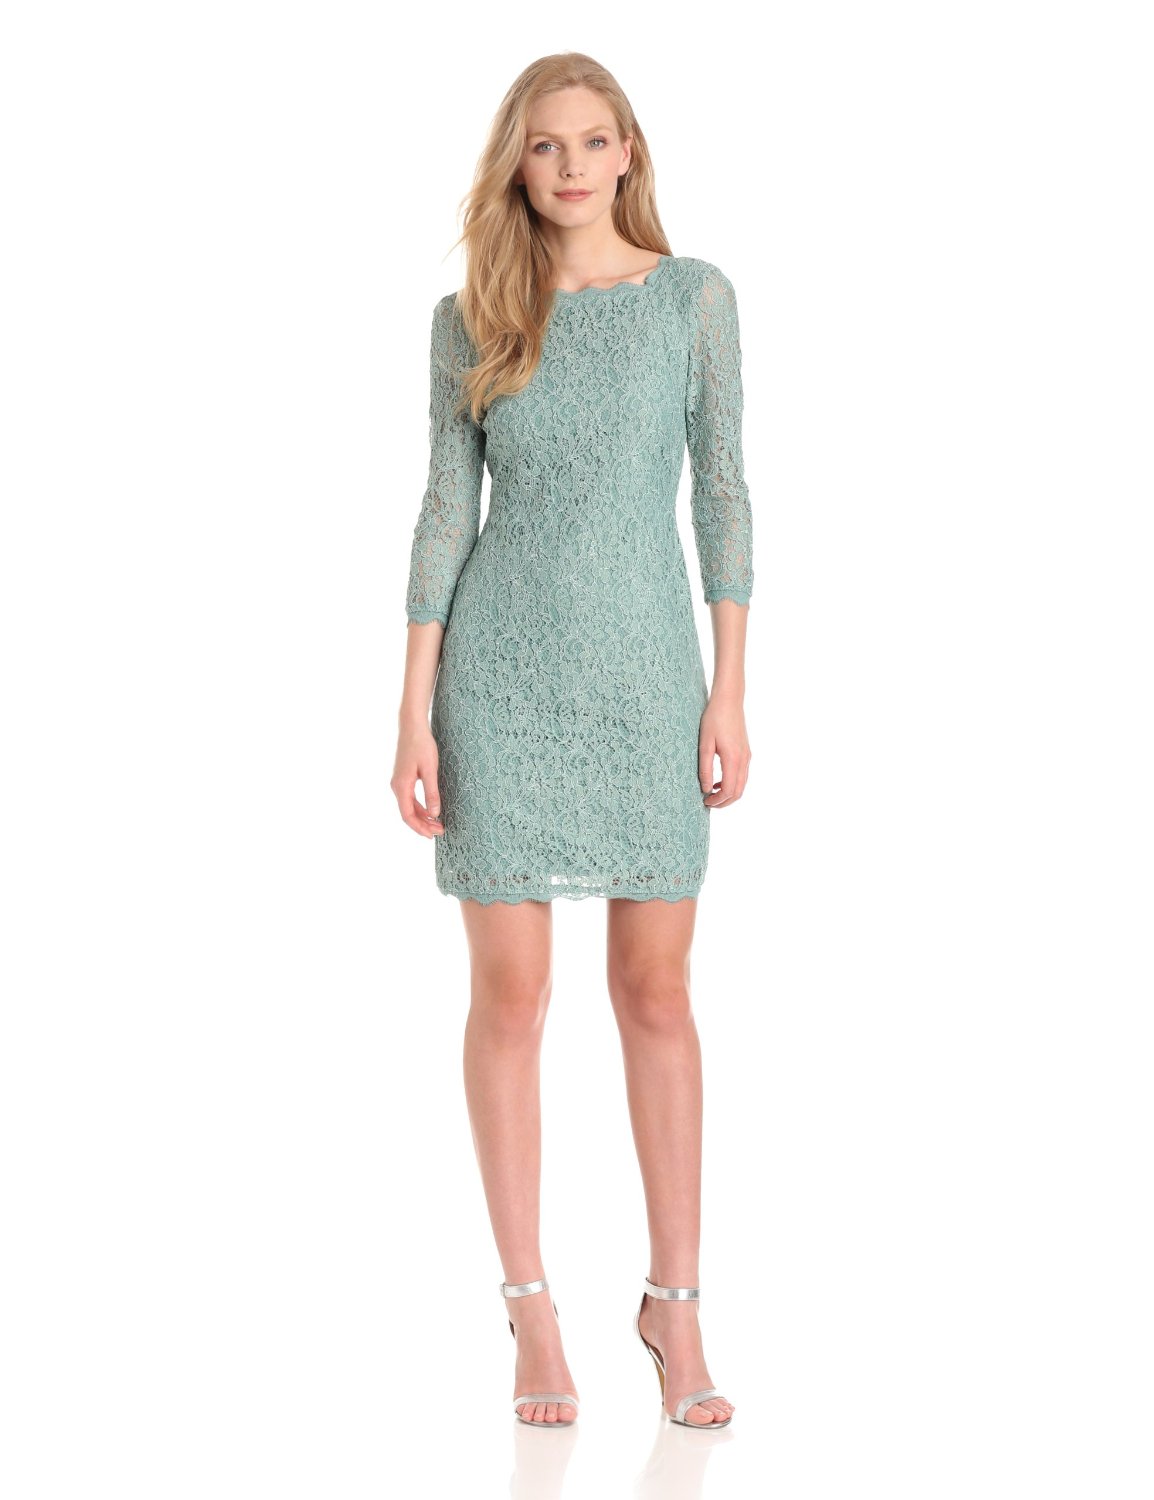 Long Sleeve Lace Dress in Green - Dresses